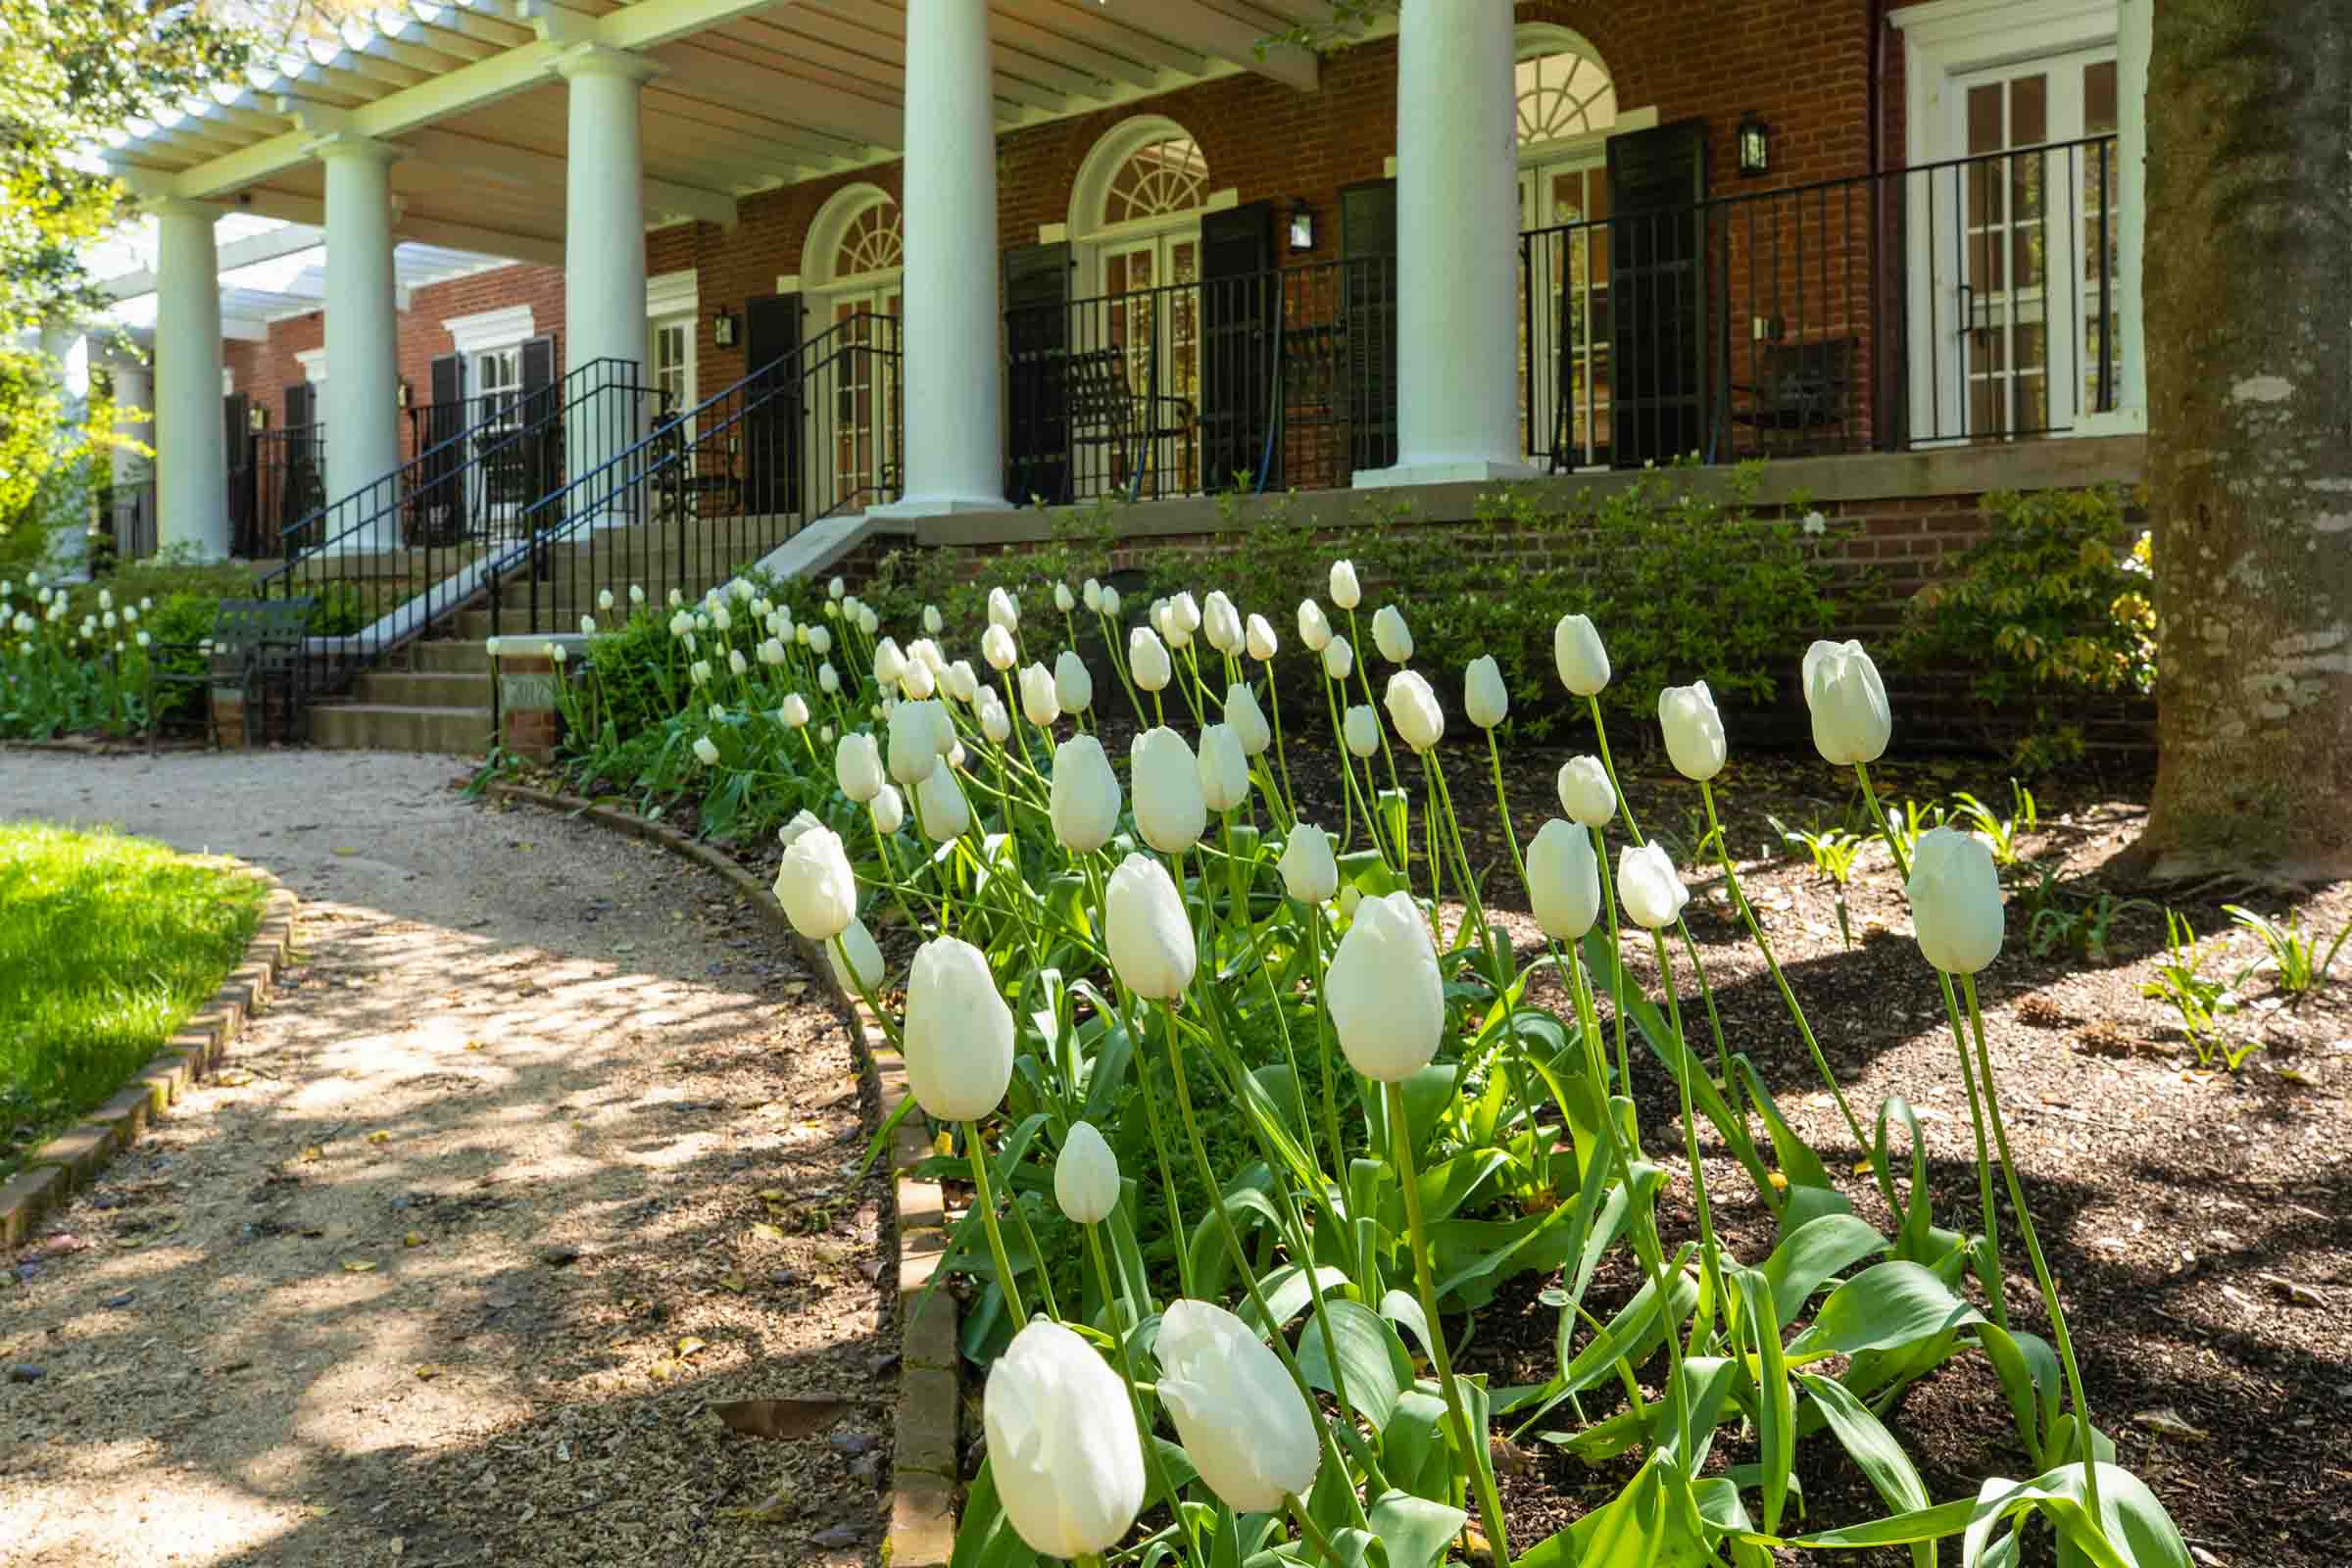 White Tulips lining a walkway to a brick building with tall white columns